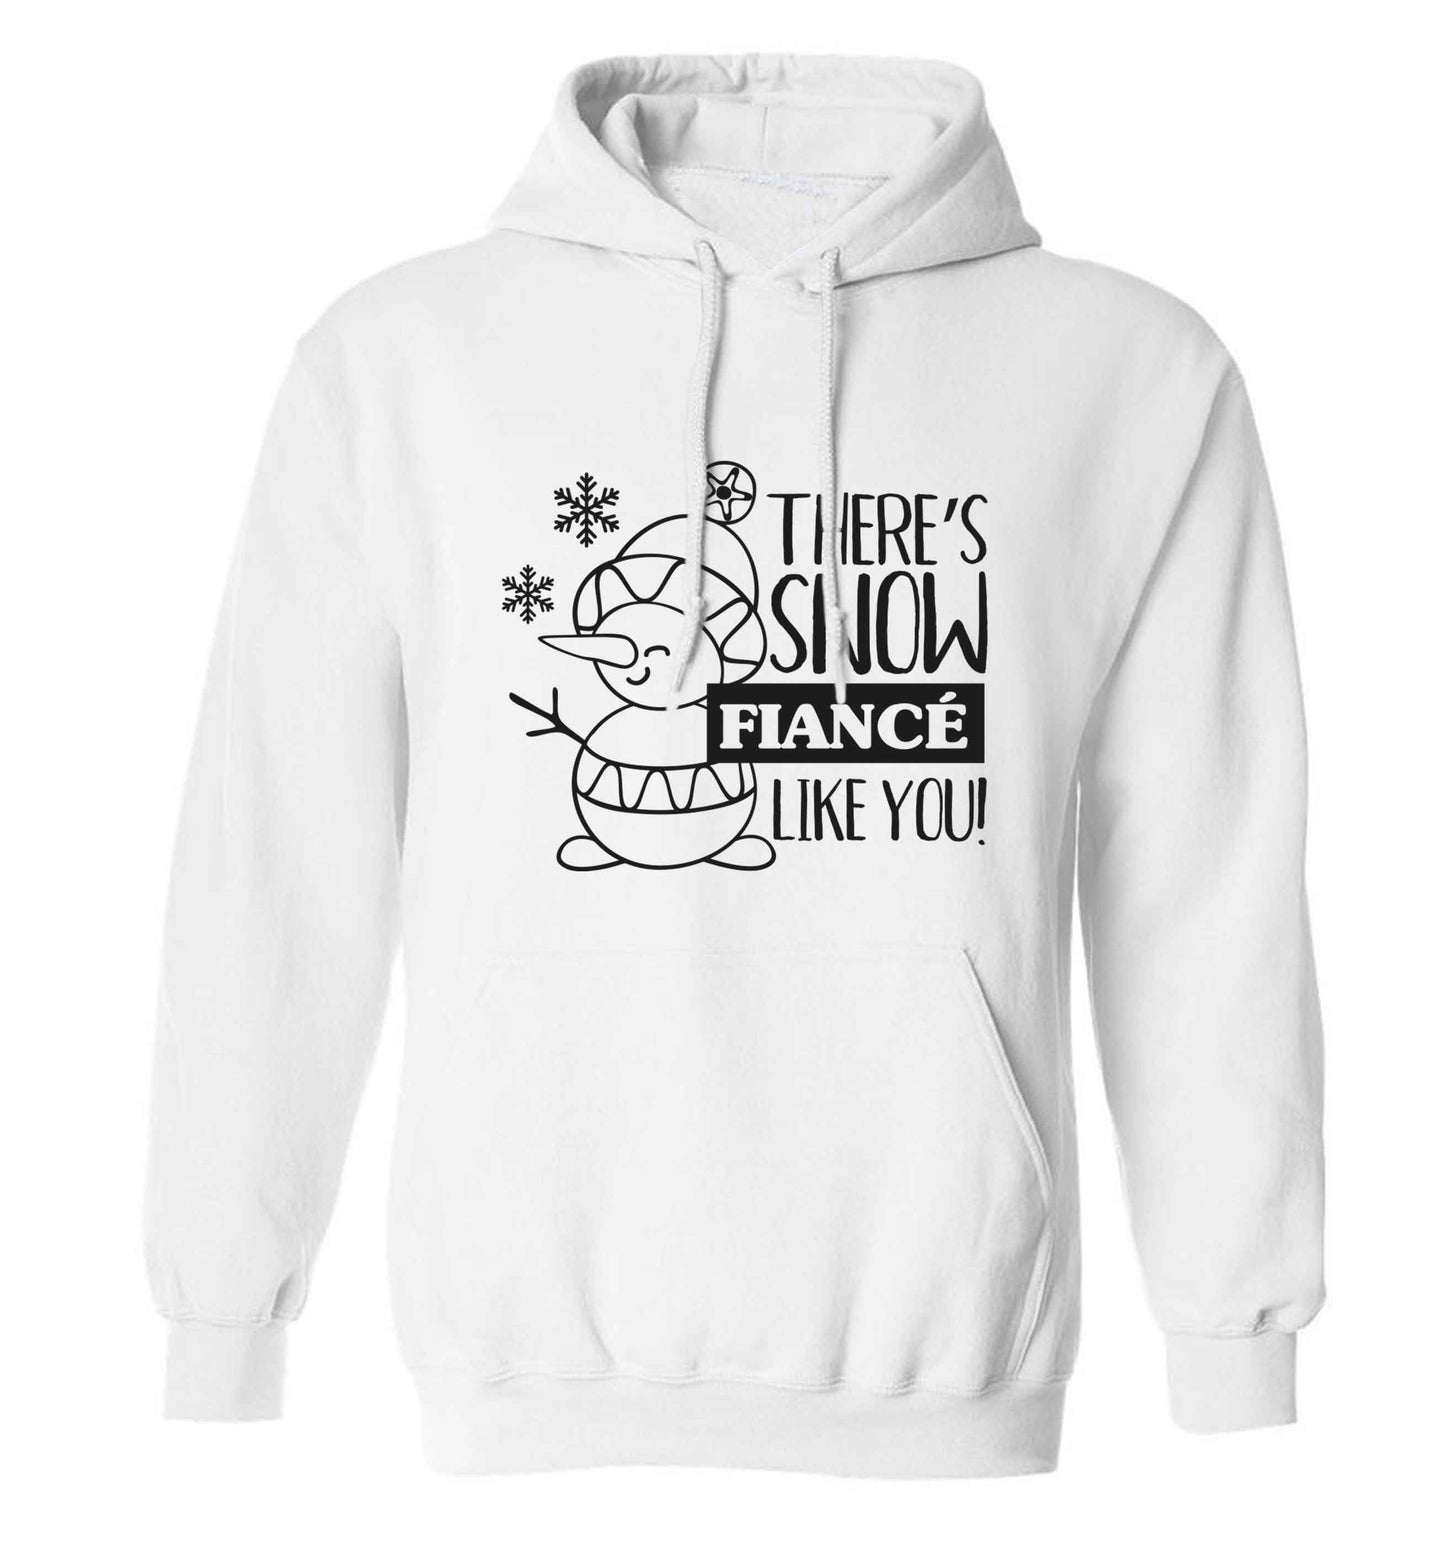 There's snow fiance like you adults unisex white hoodie 2XL